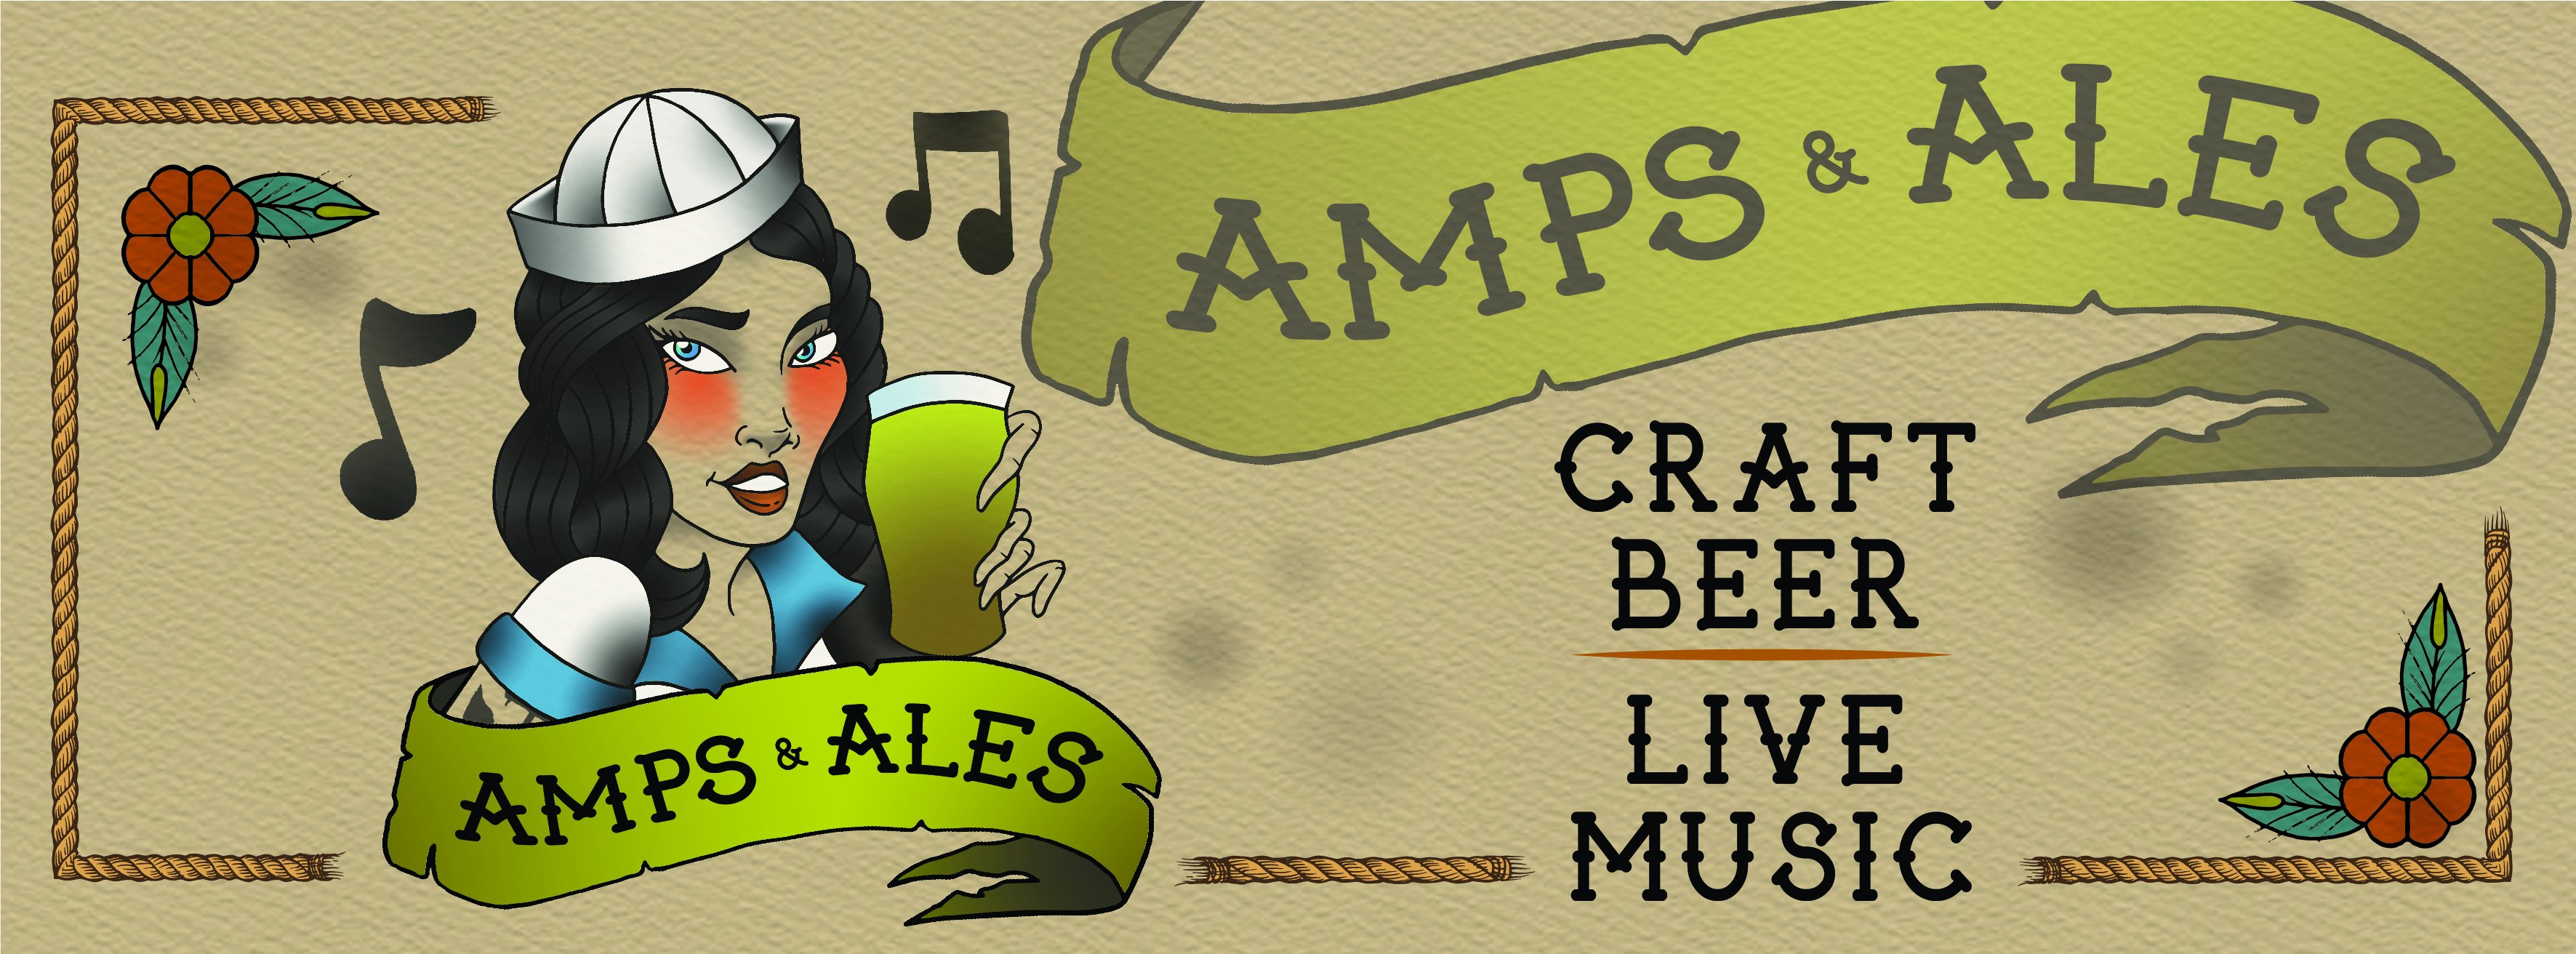 Amps & Ales Craft Beer and Music Festival banner image